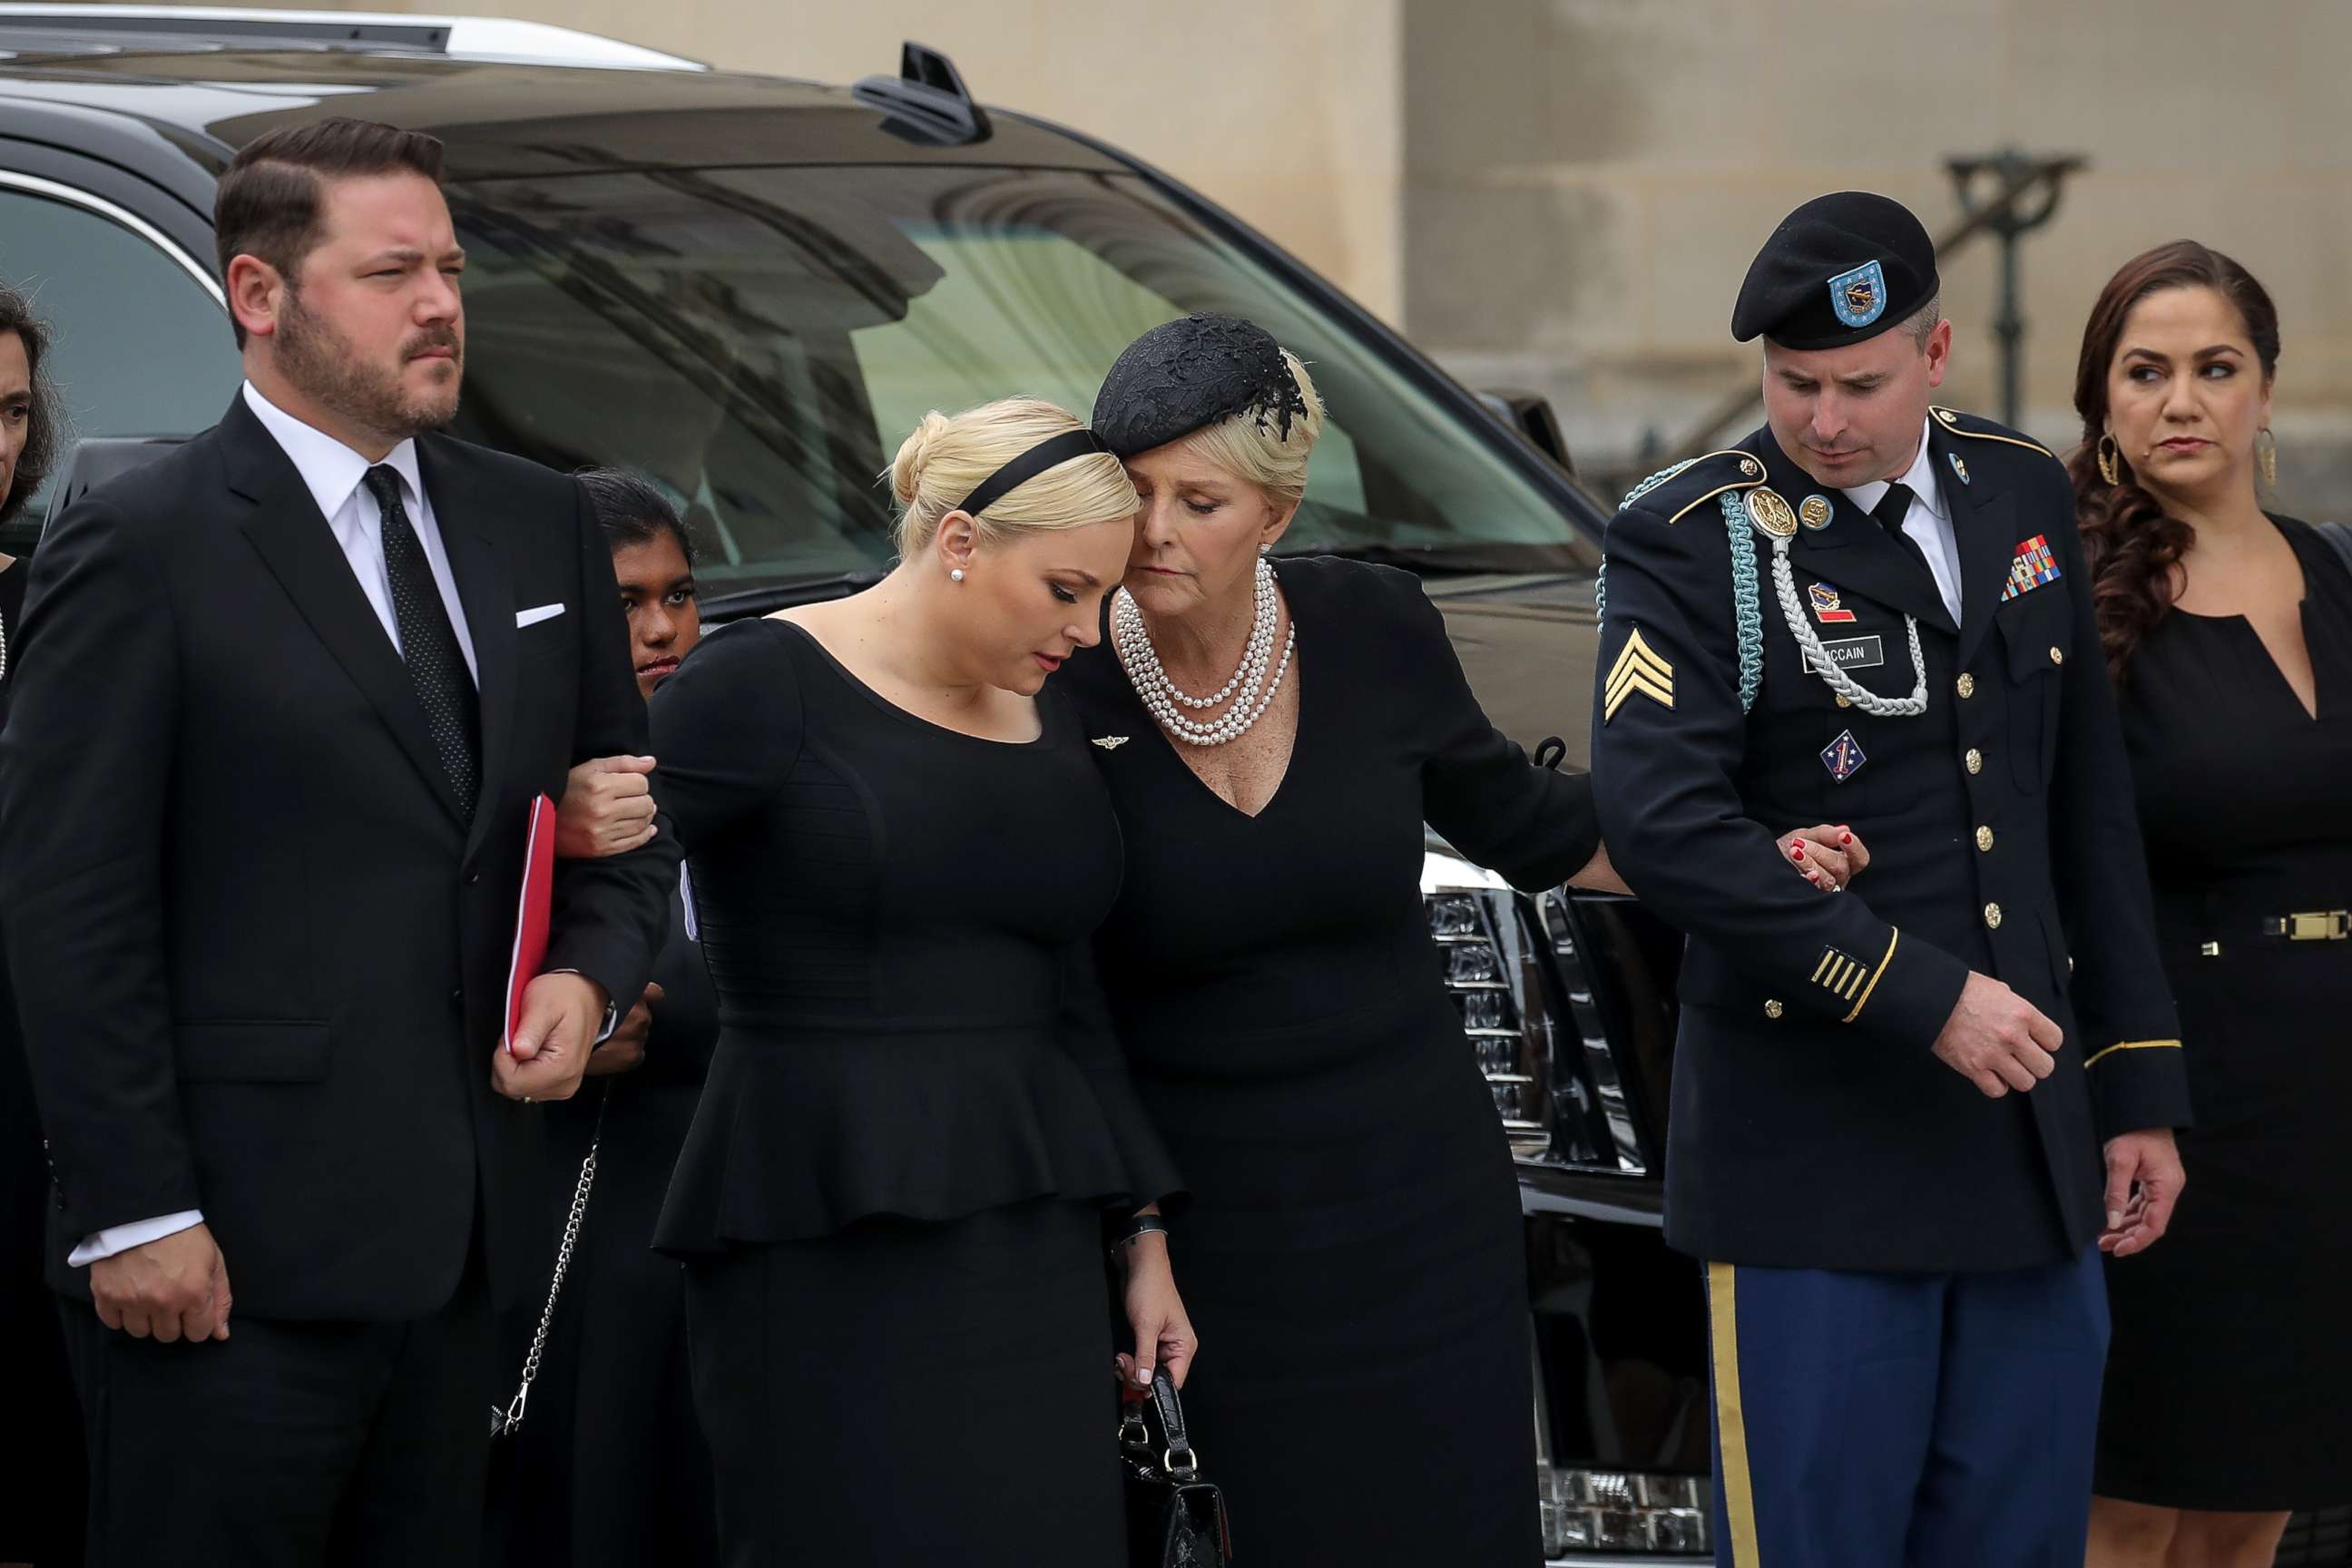 PHOTO: Meghan McCain and her mother Cindy McCain embrace as the casket of the late Senator John McCain arrives at the Washington National Cathedral for the funeral service for McCain, Sept. 1, 2018, in Washington.